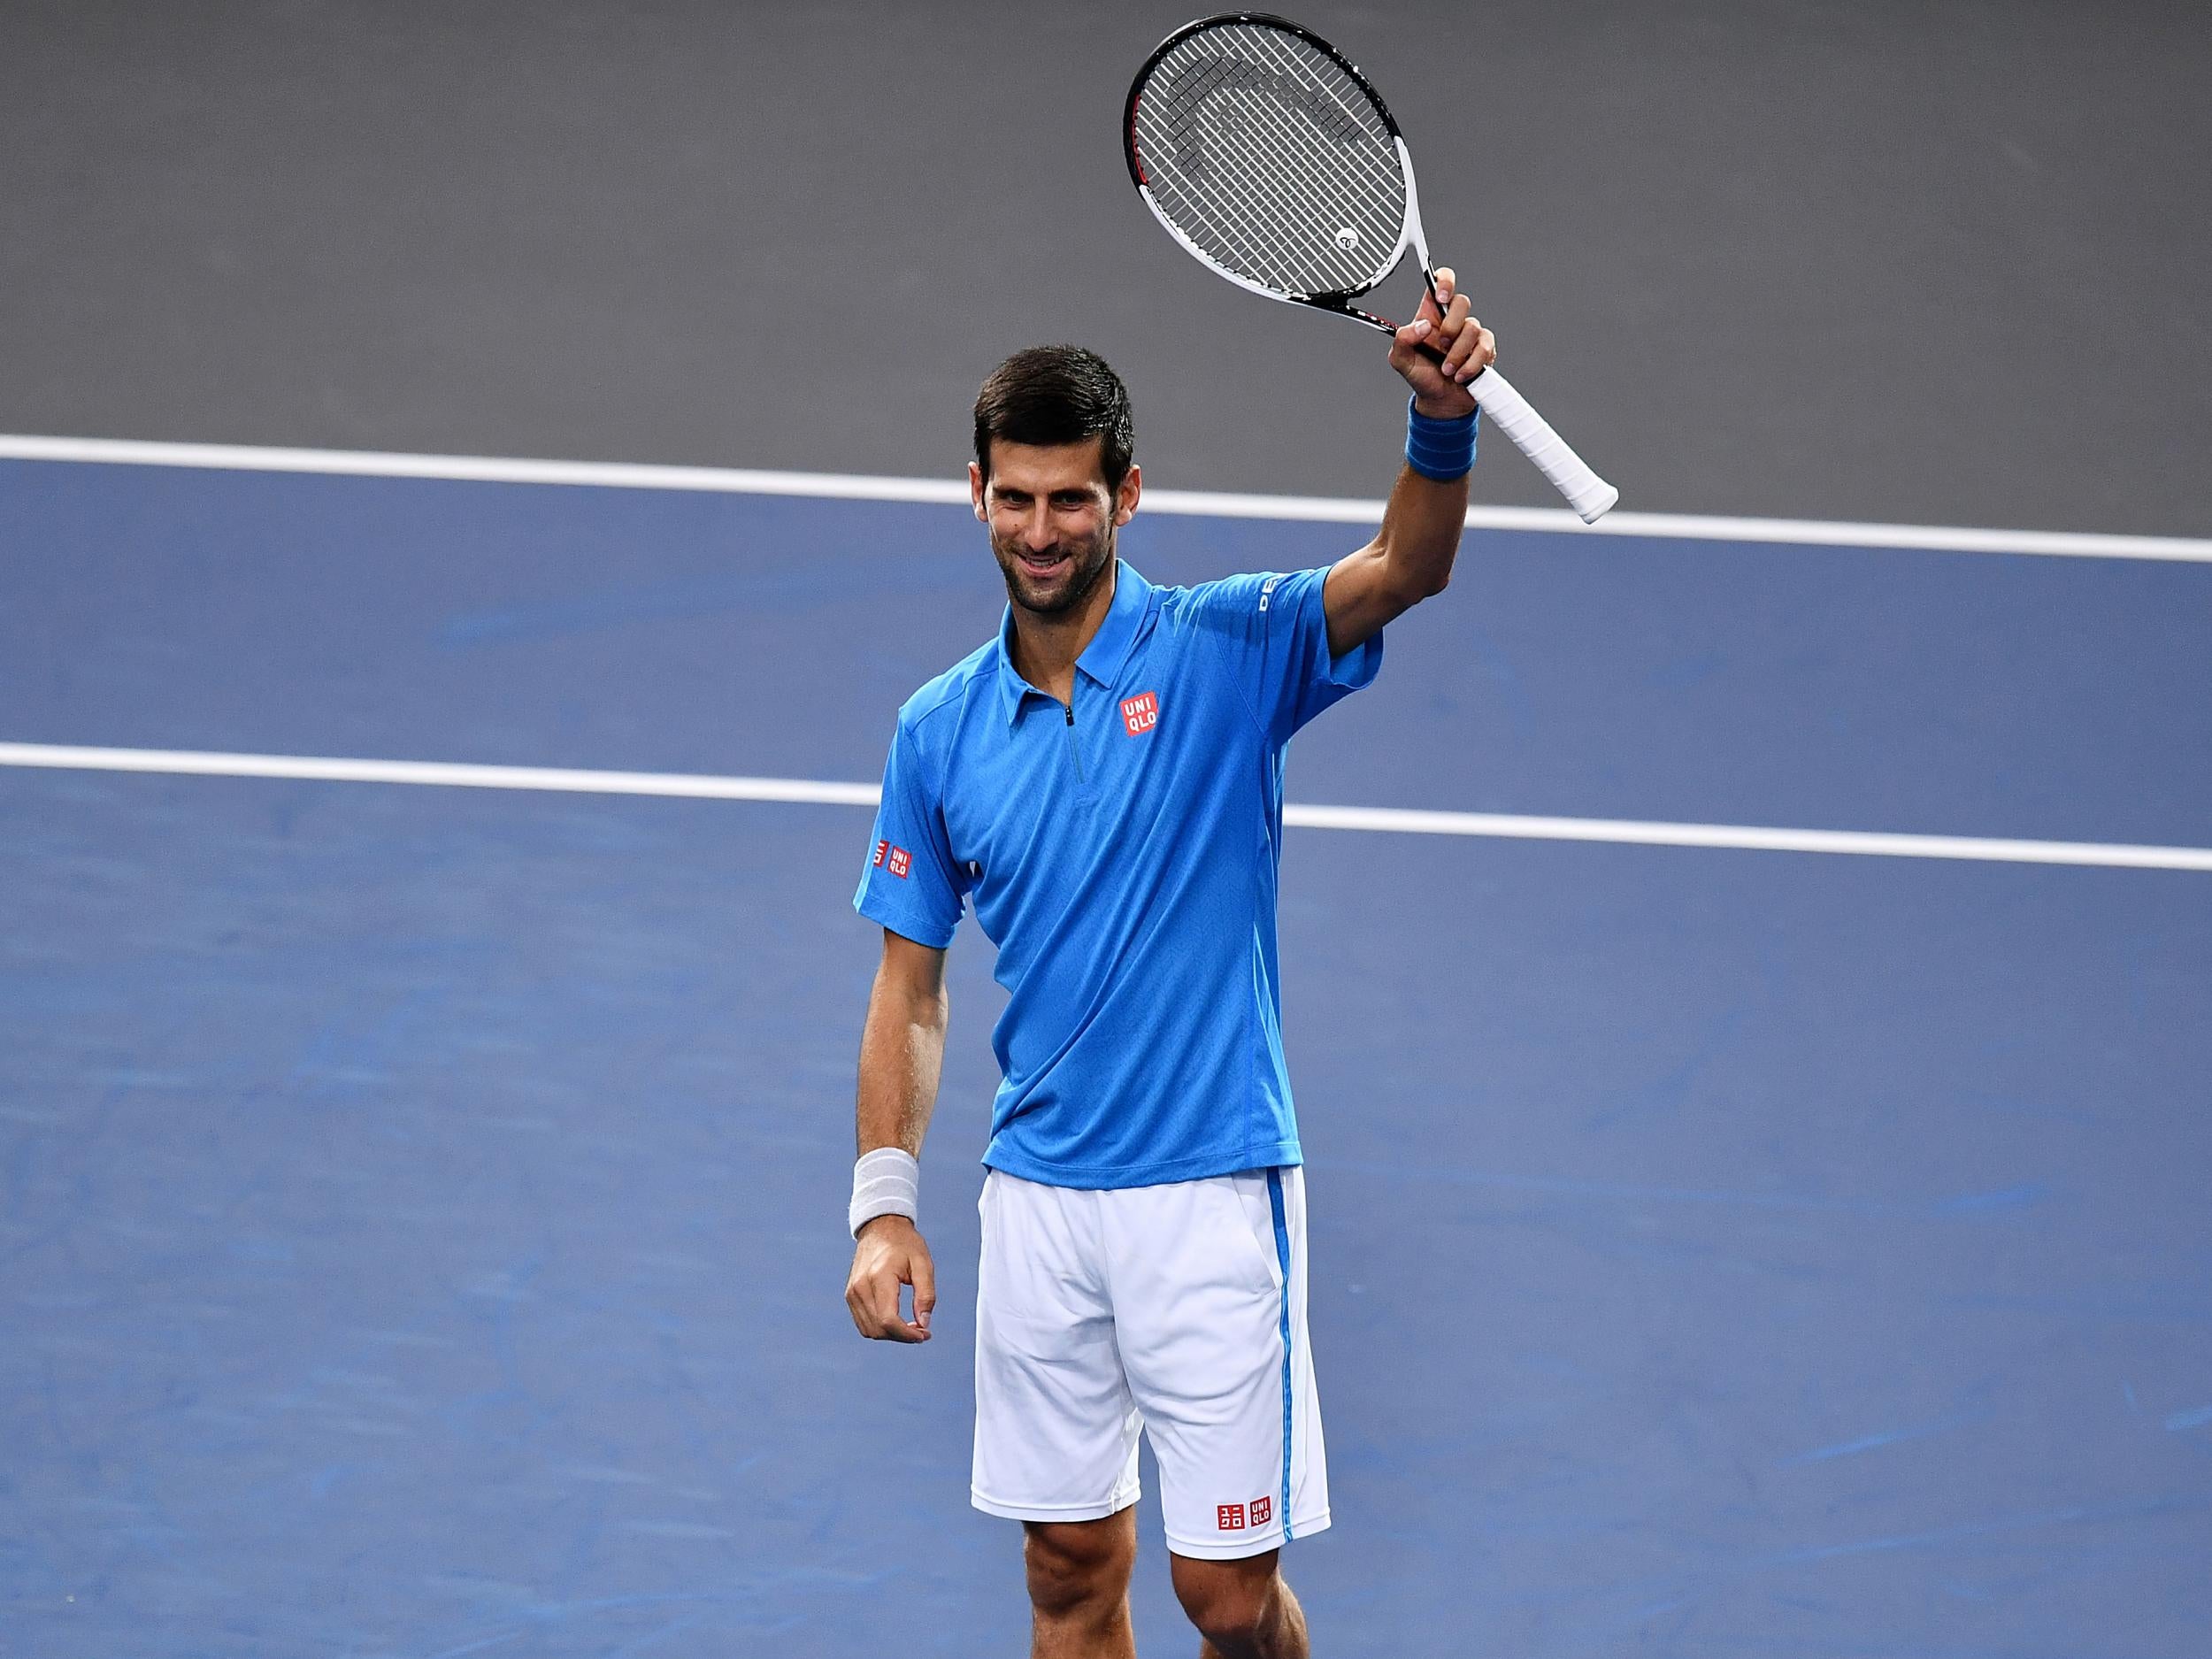 Djokovic has been world number one for over two years